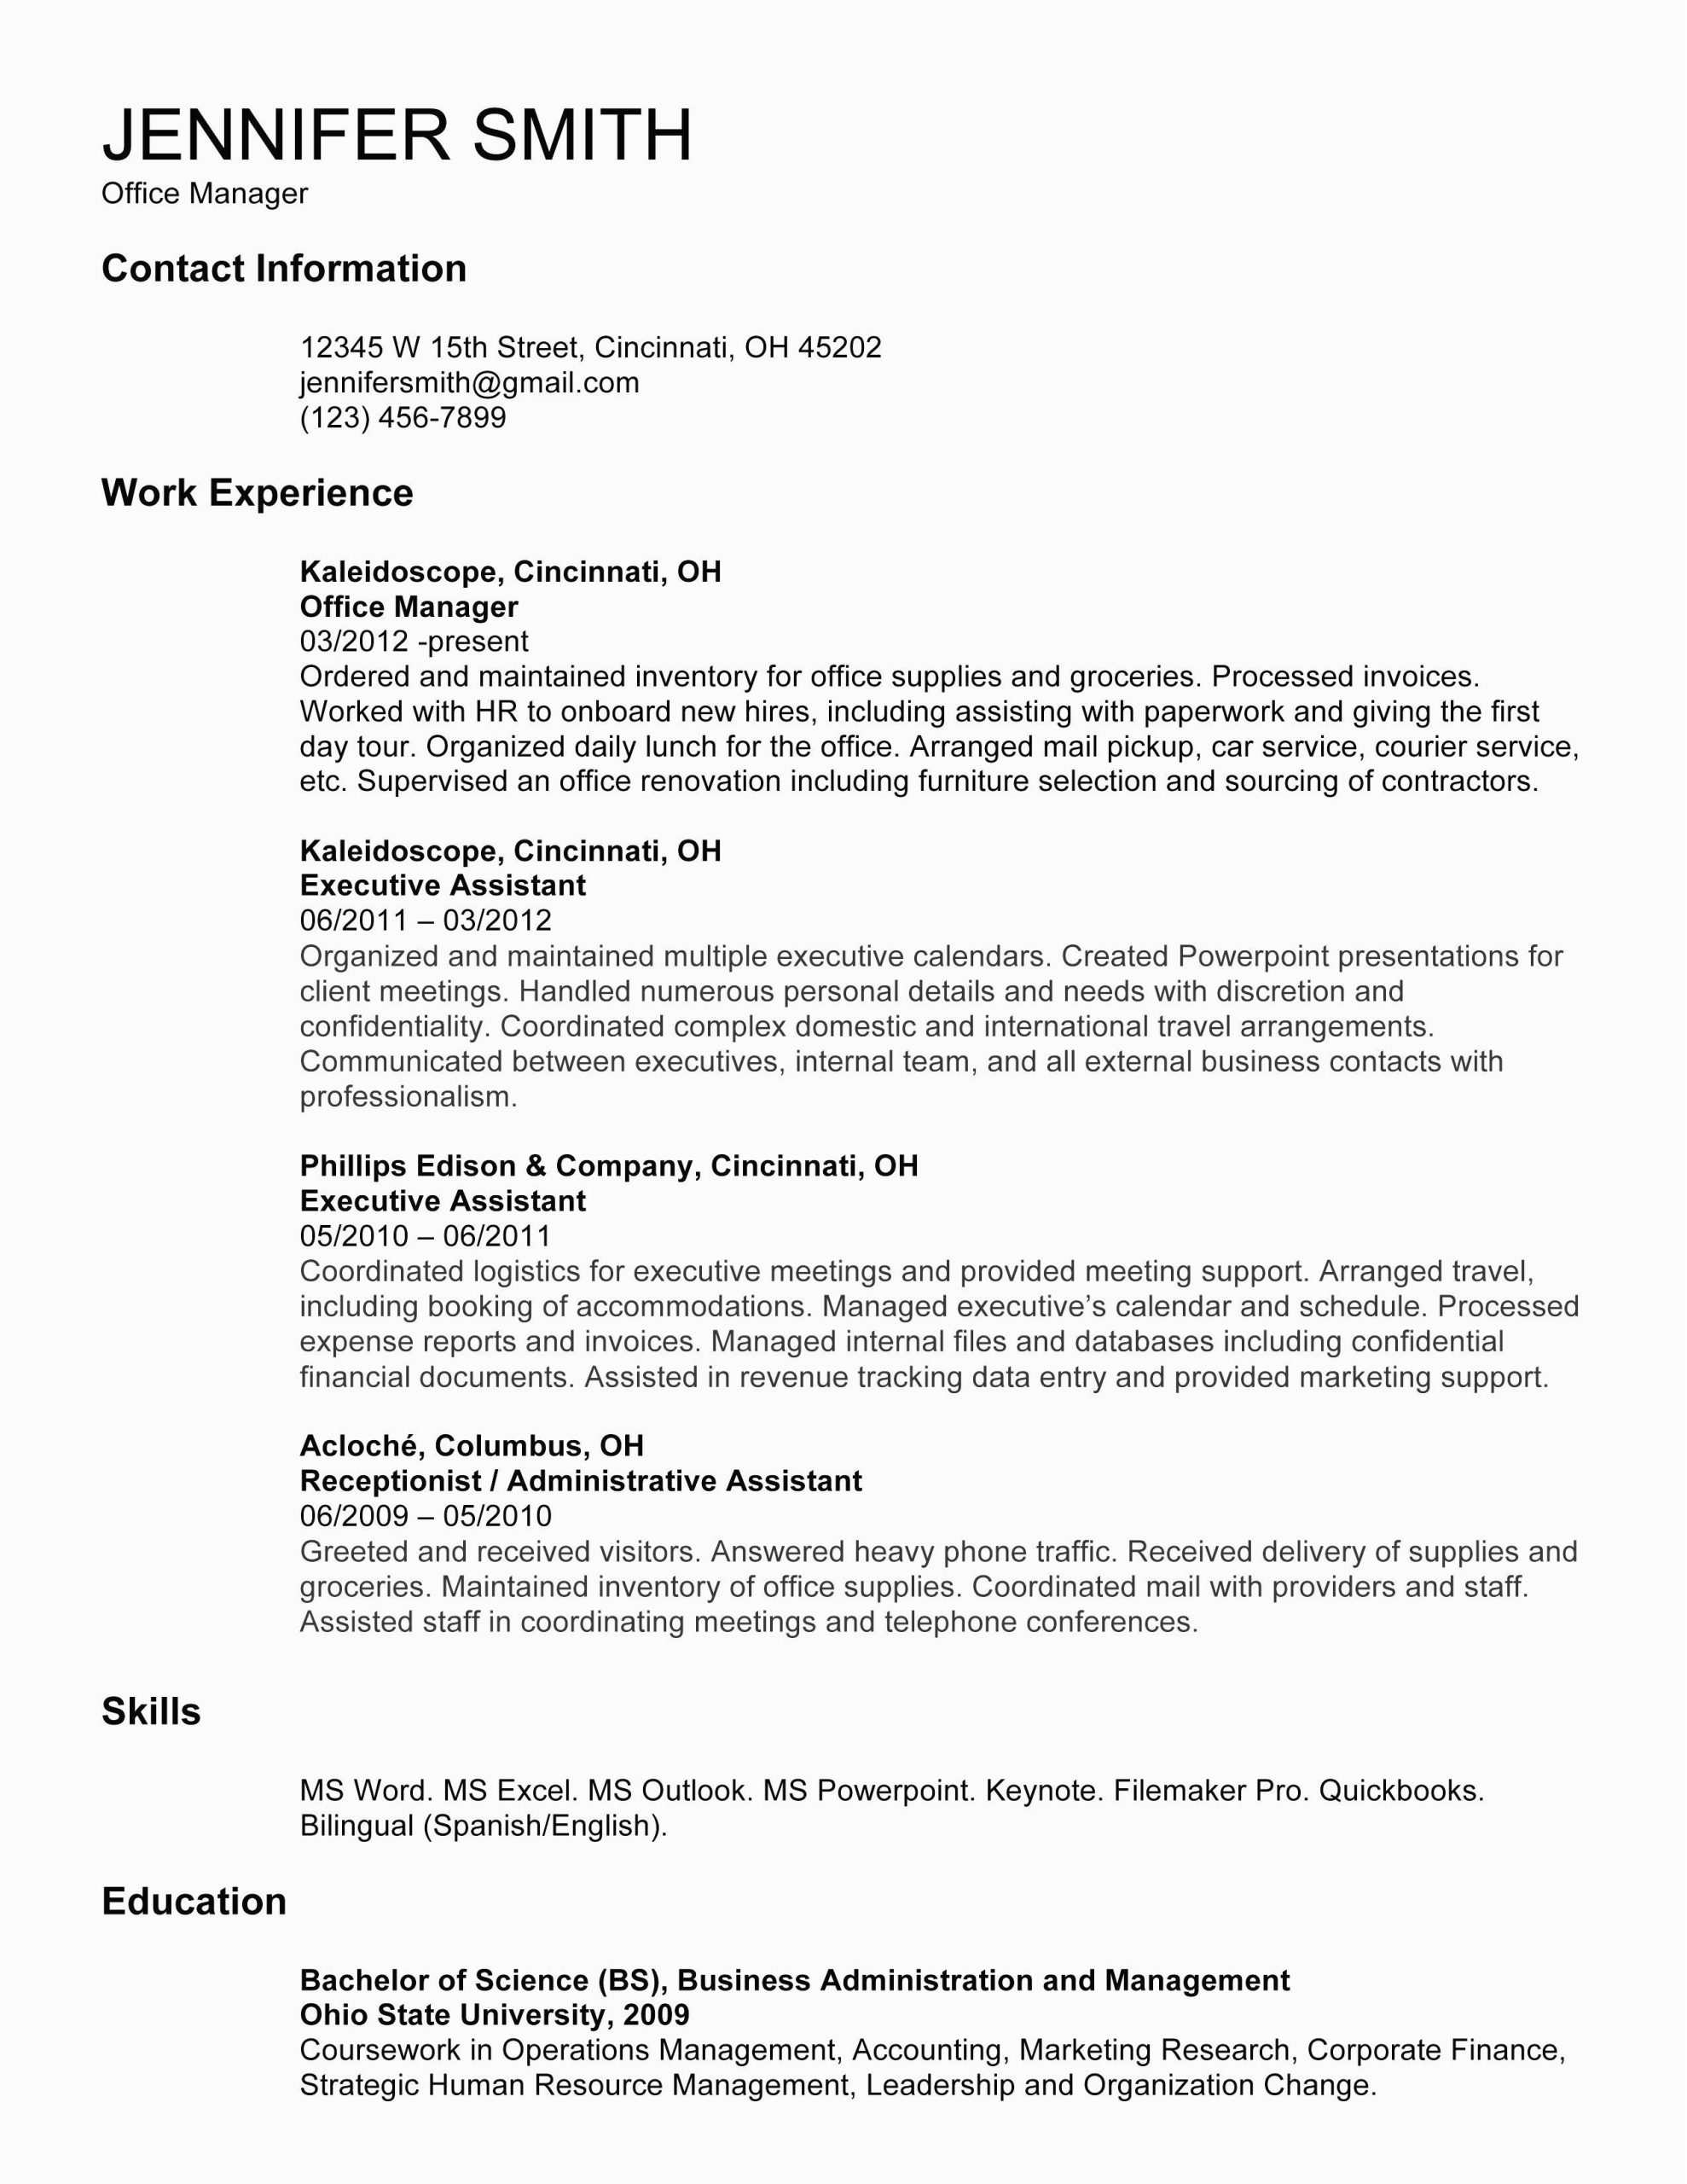 Resume Sample for One Job Title but 2 Diferent Company Resume Example Multiple Positions Same Pany